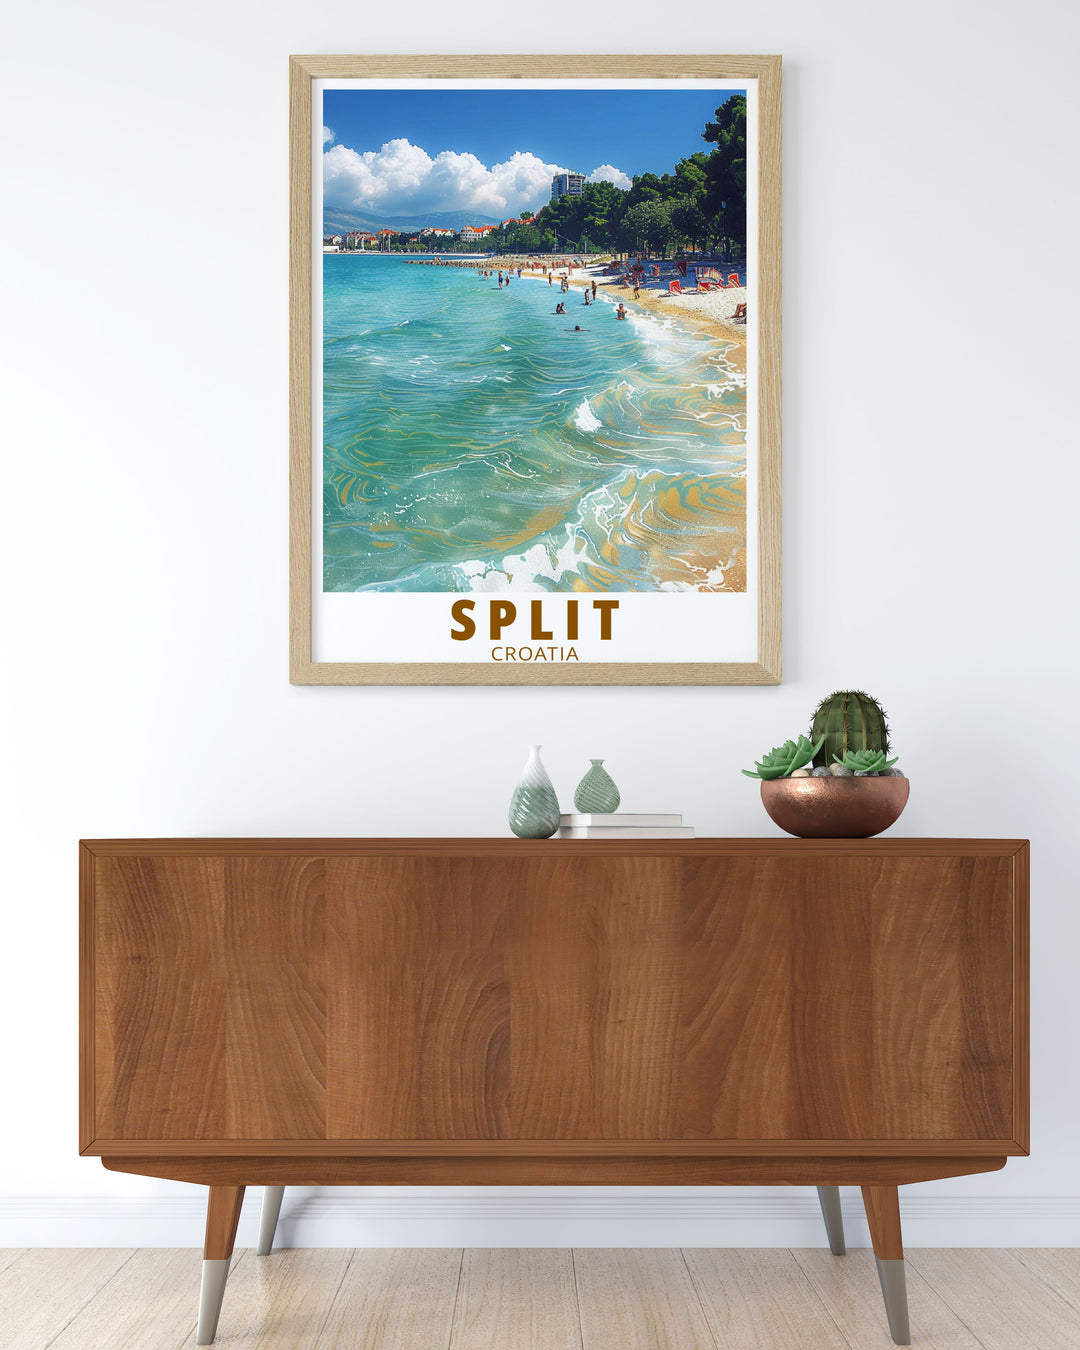 The vibrant beach and historic significance of Split are depicted in this travel poster, showcasing the natural beauty and cultural richness that define Croatia.